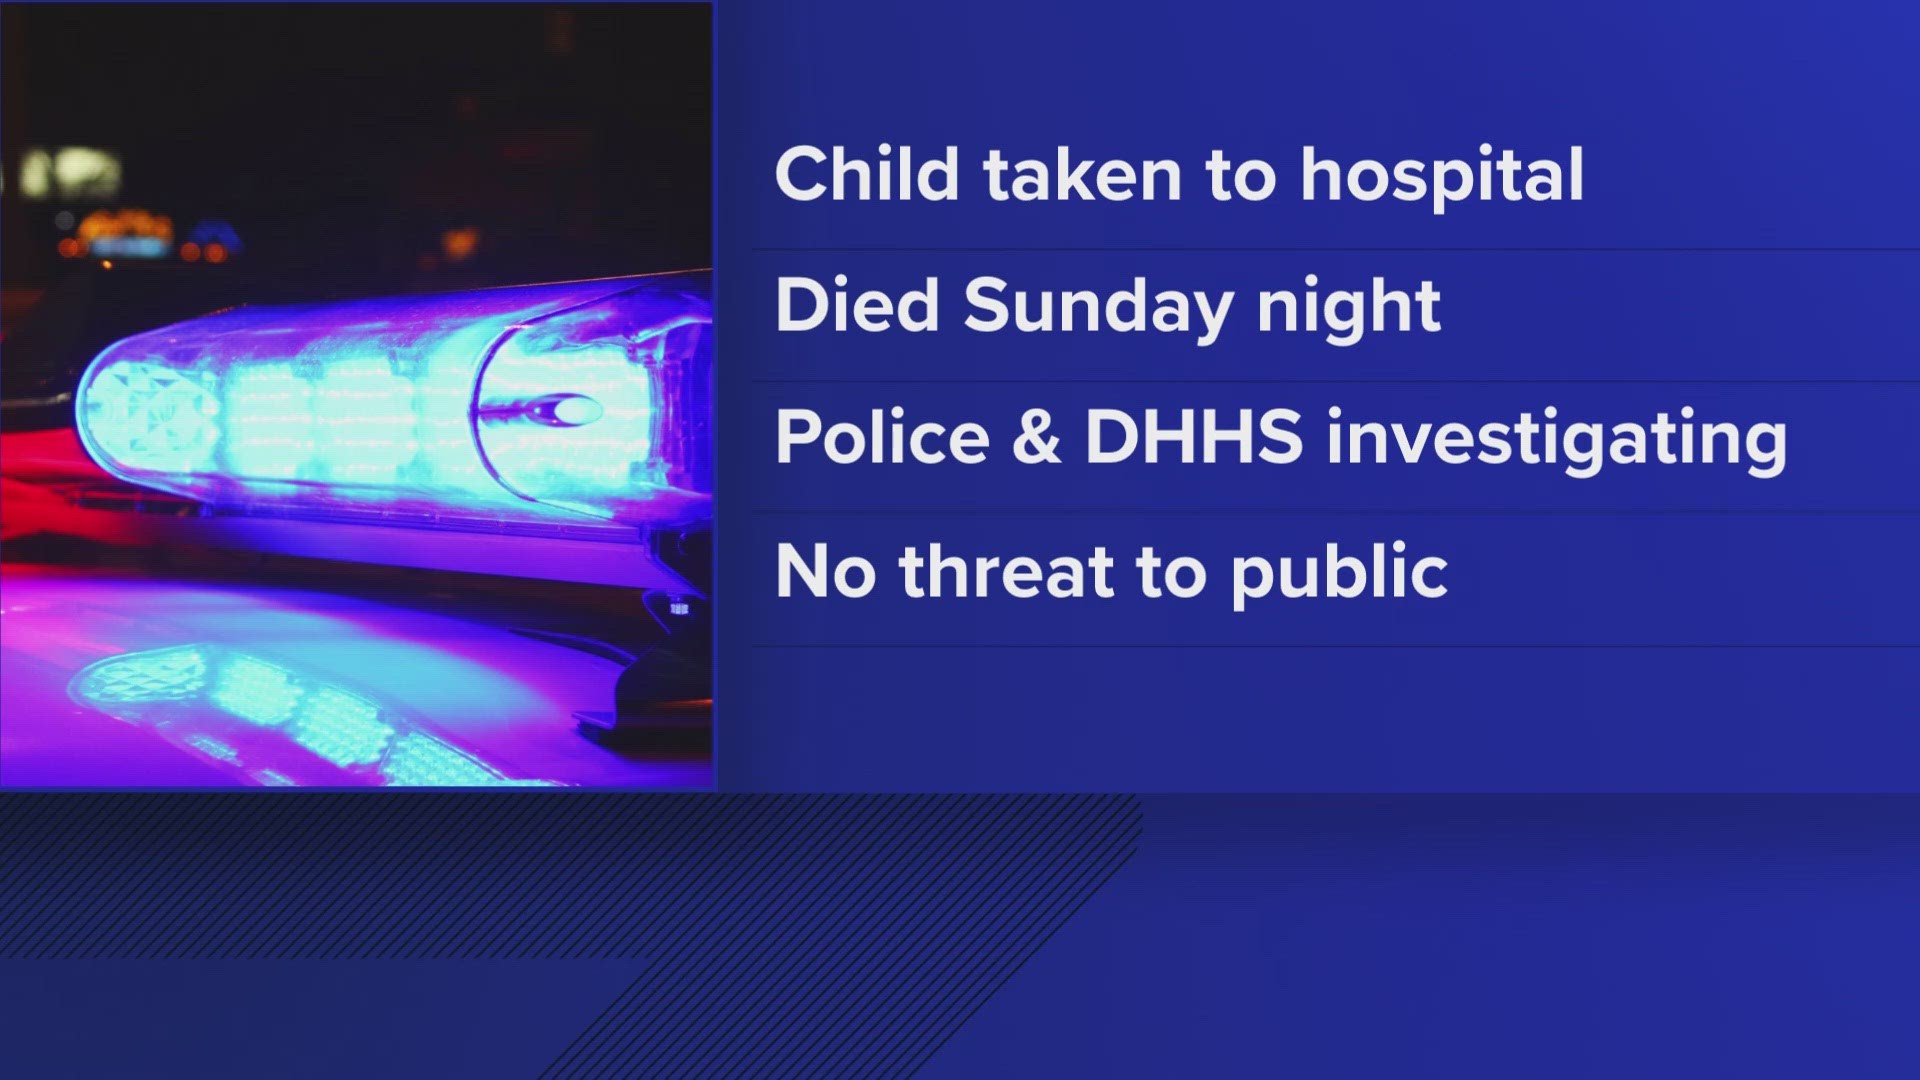 The hospital notified police and Maine DHHS after the child was brought there Sunday with life-threatening injuries.